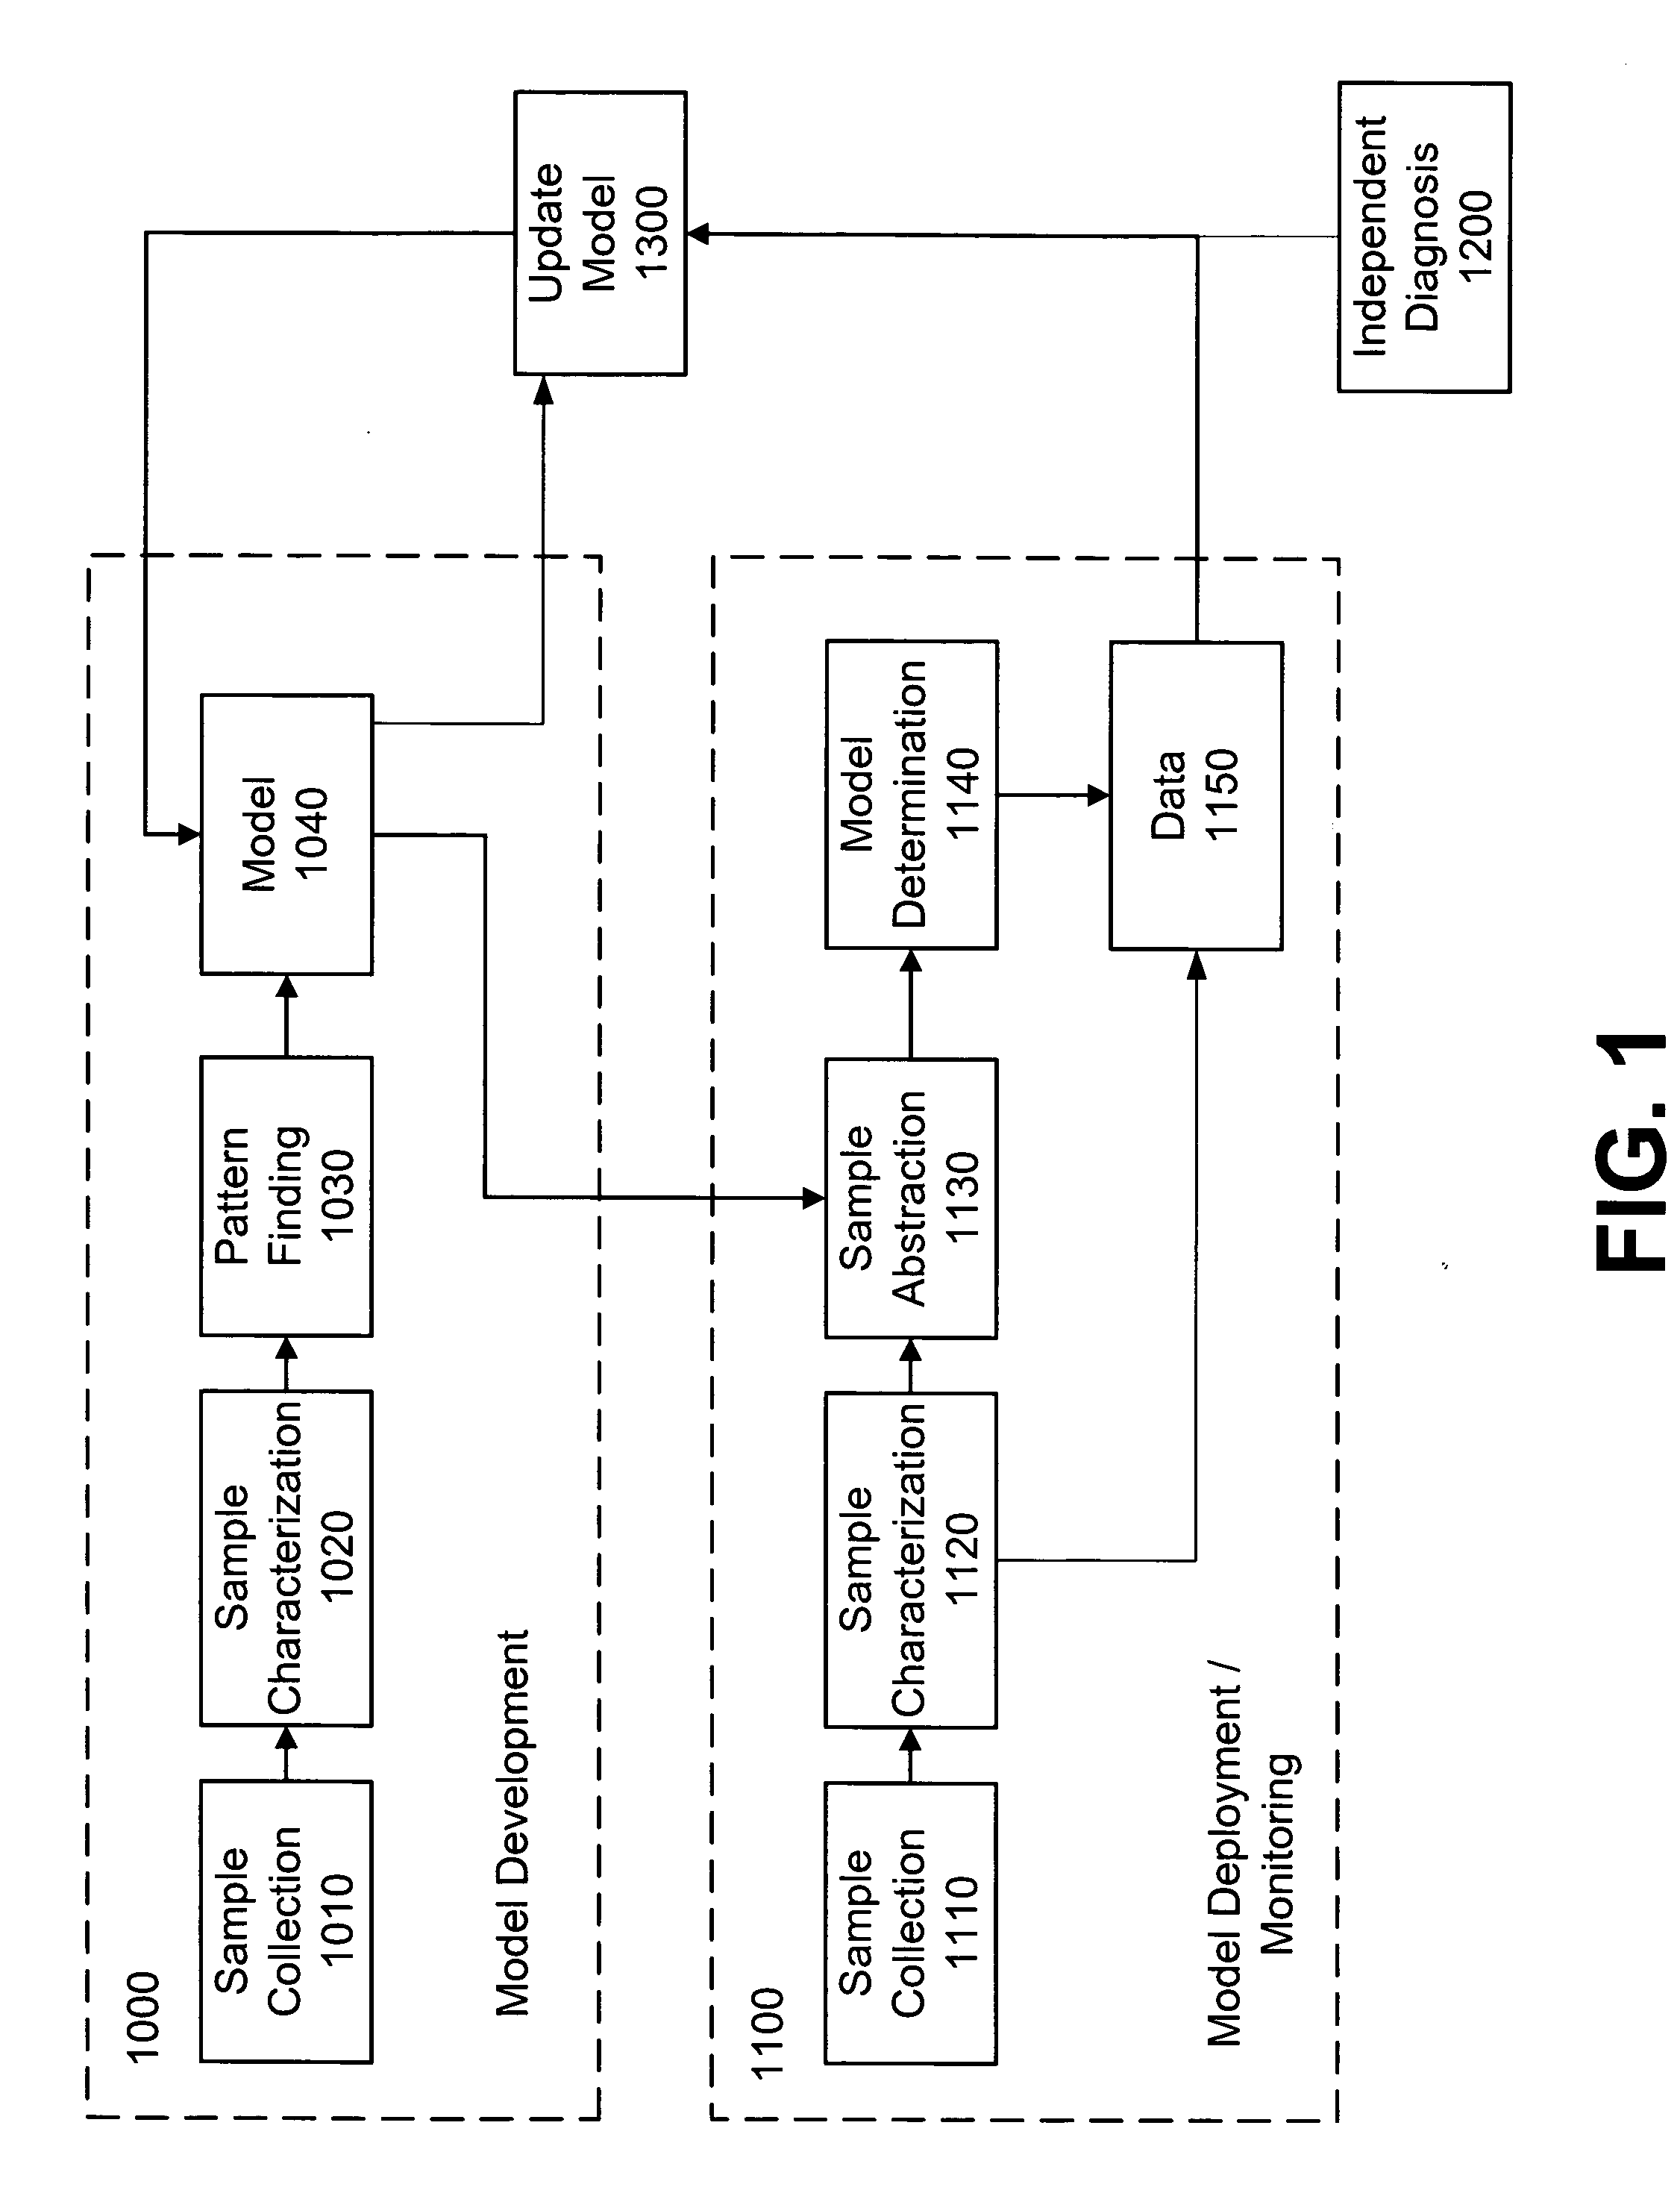 Method of diagnosing biological states through the use of a centralized, adaptive model, and remote sample processing